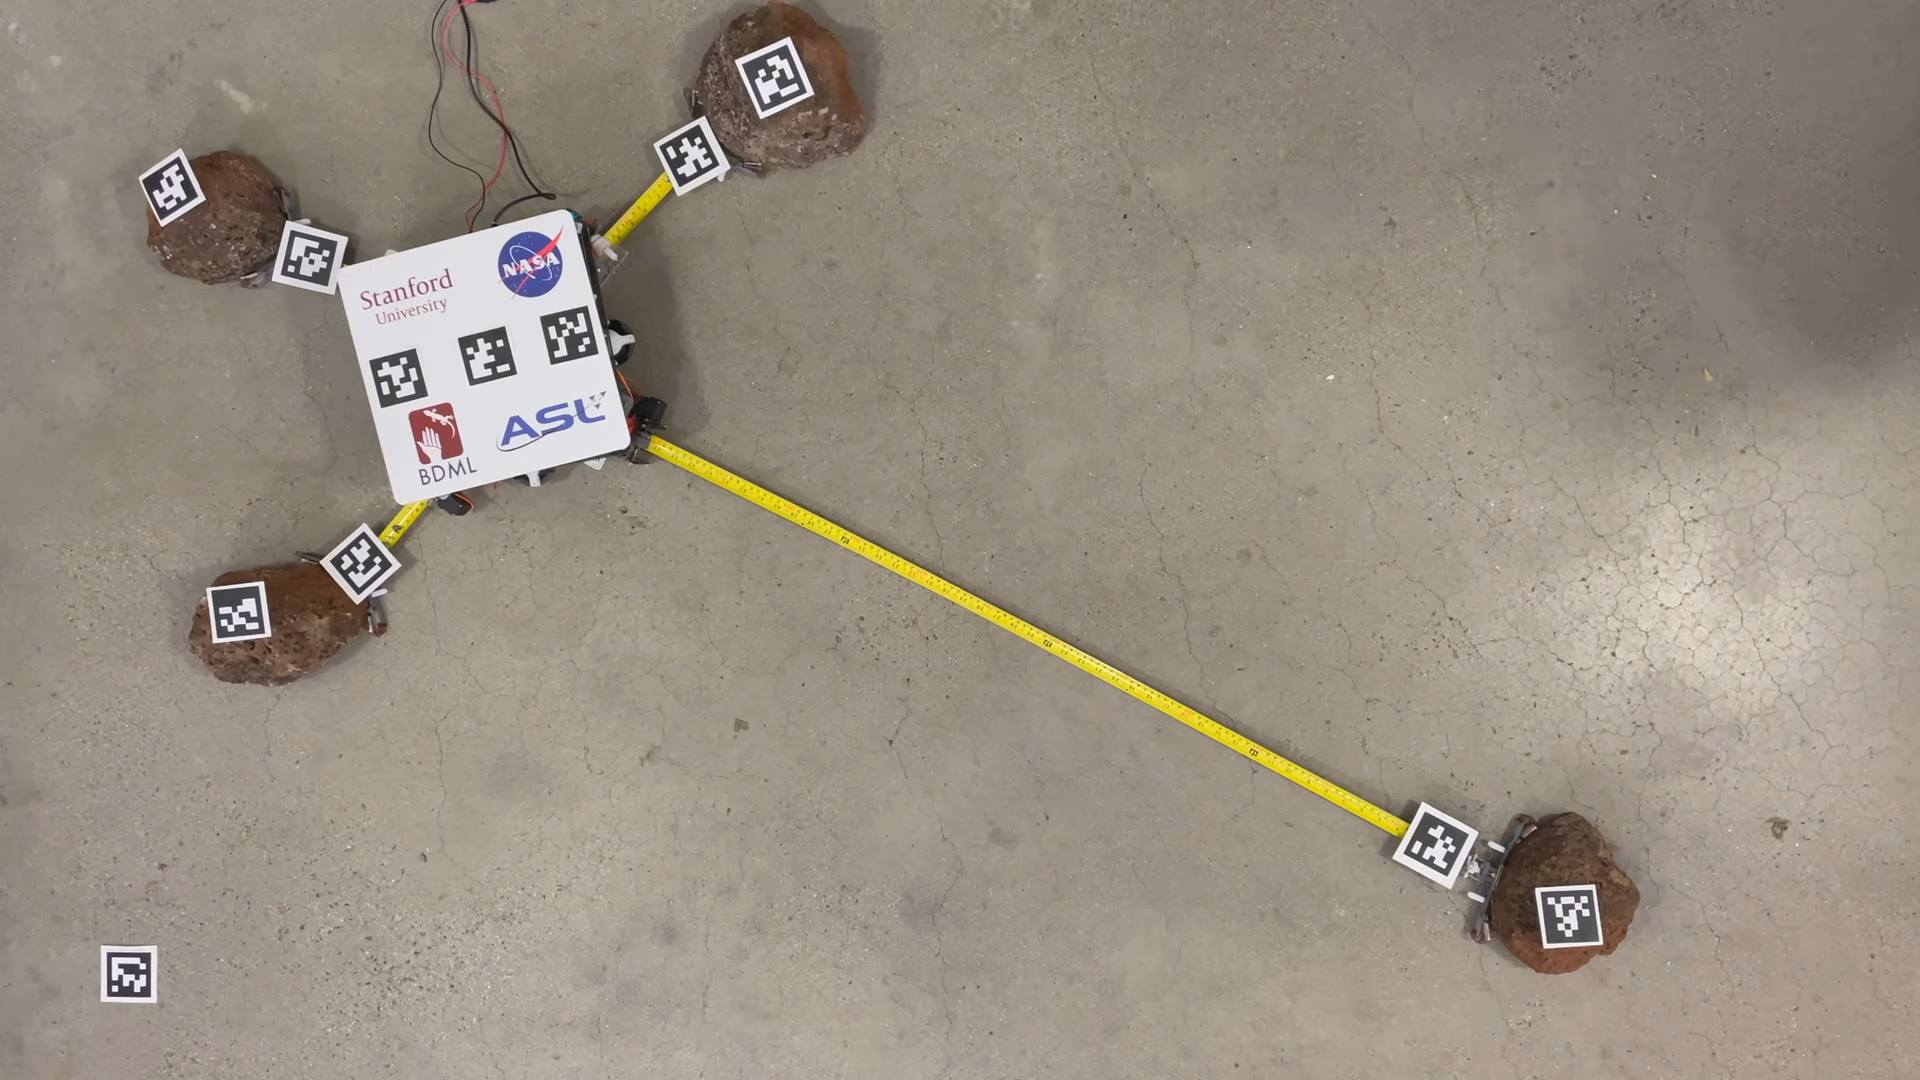 A square white robot on a concrete floor attaches to rocks using grippers on the ends of extended metal measuring tapes.